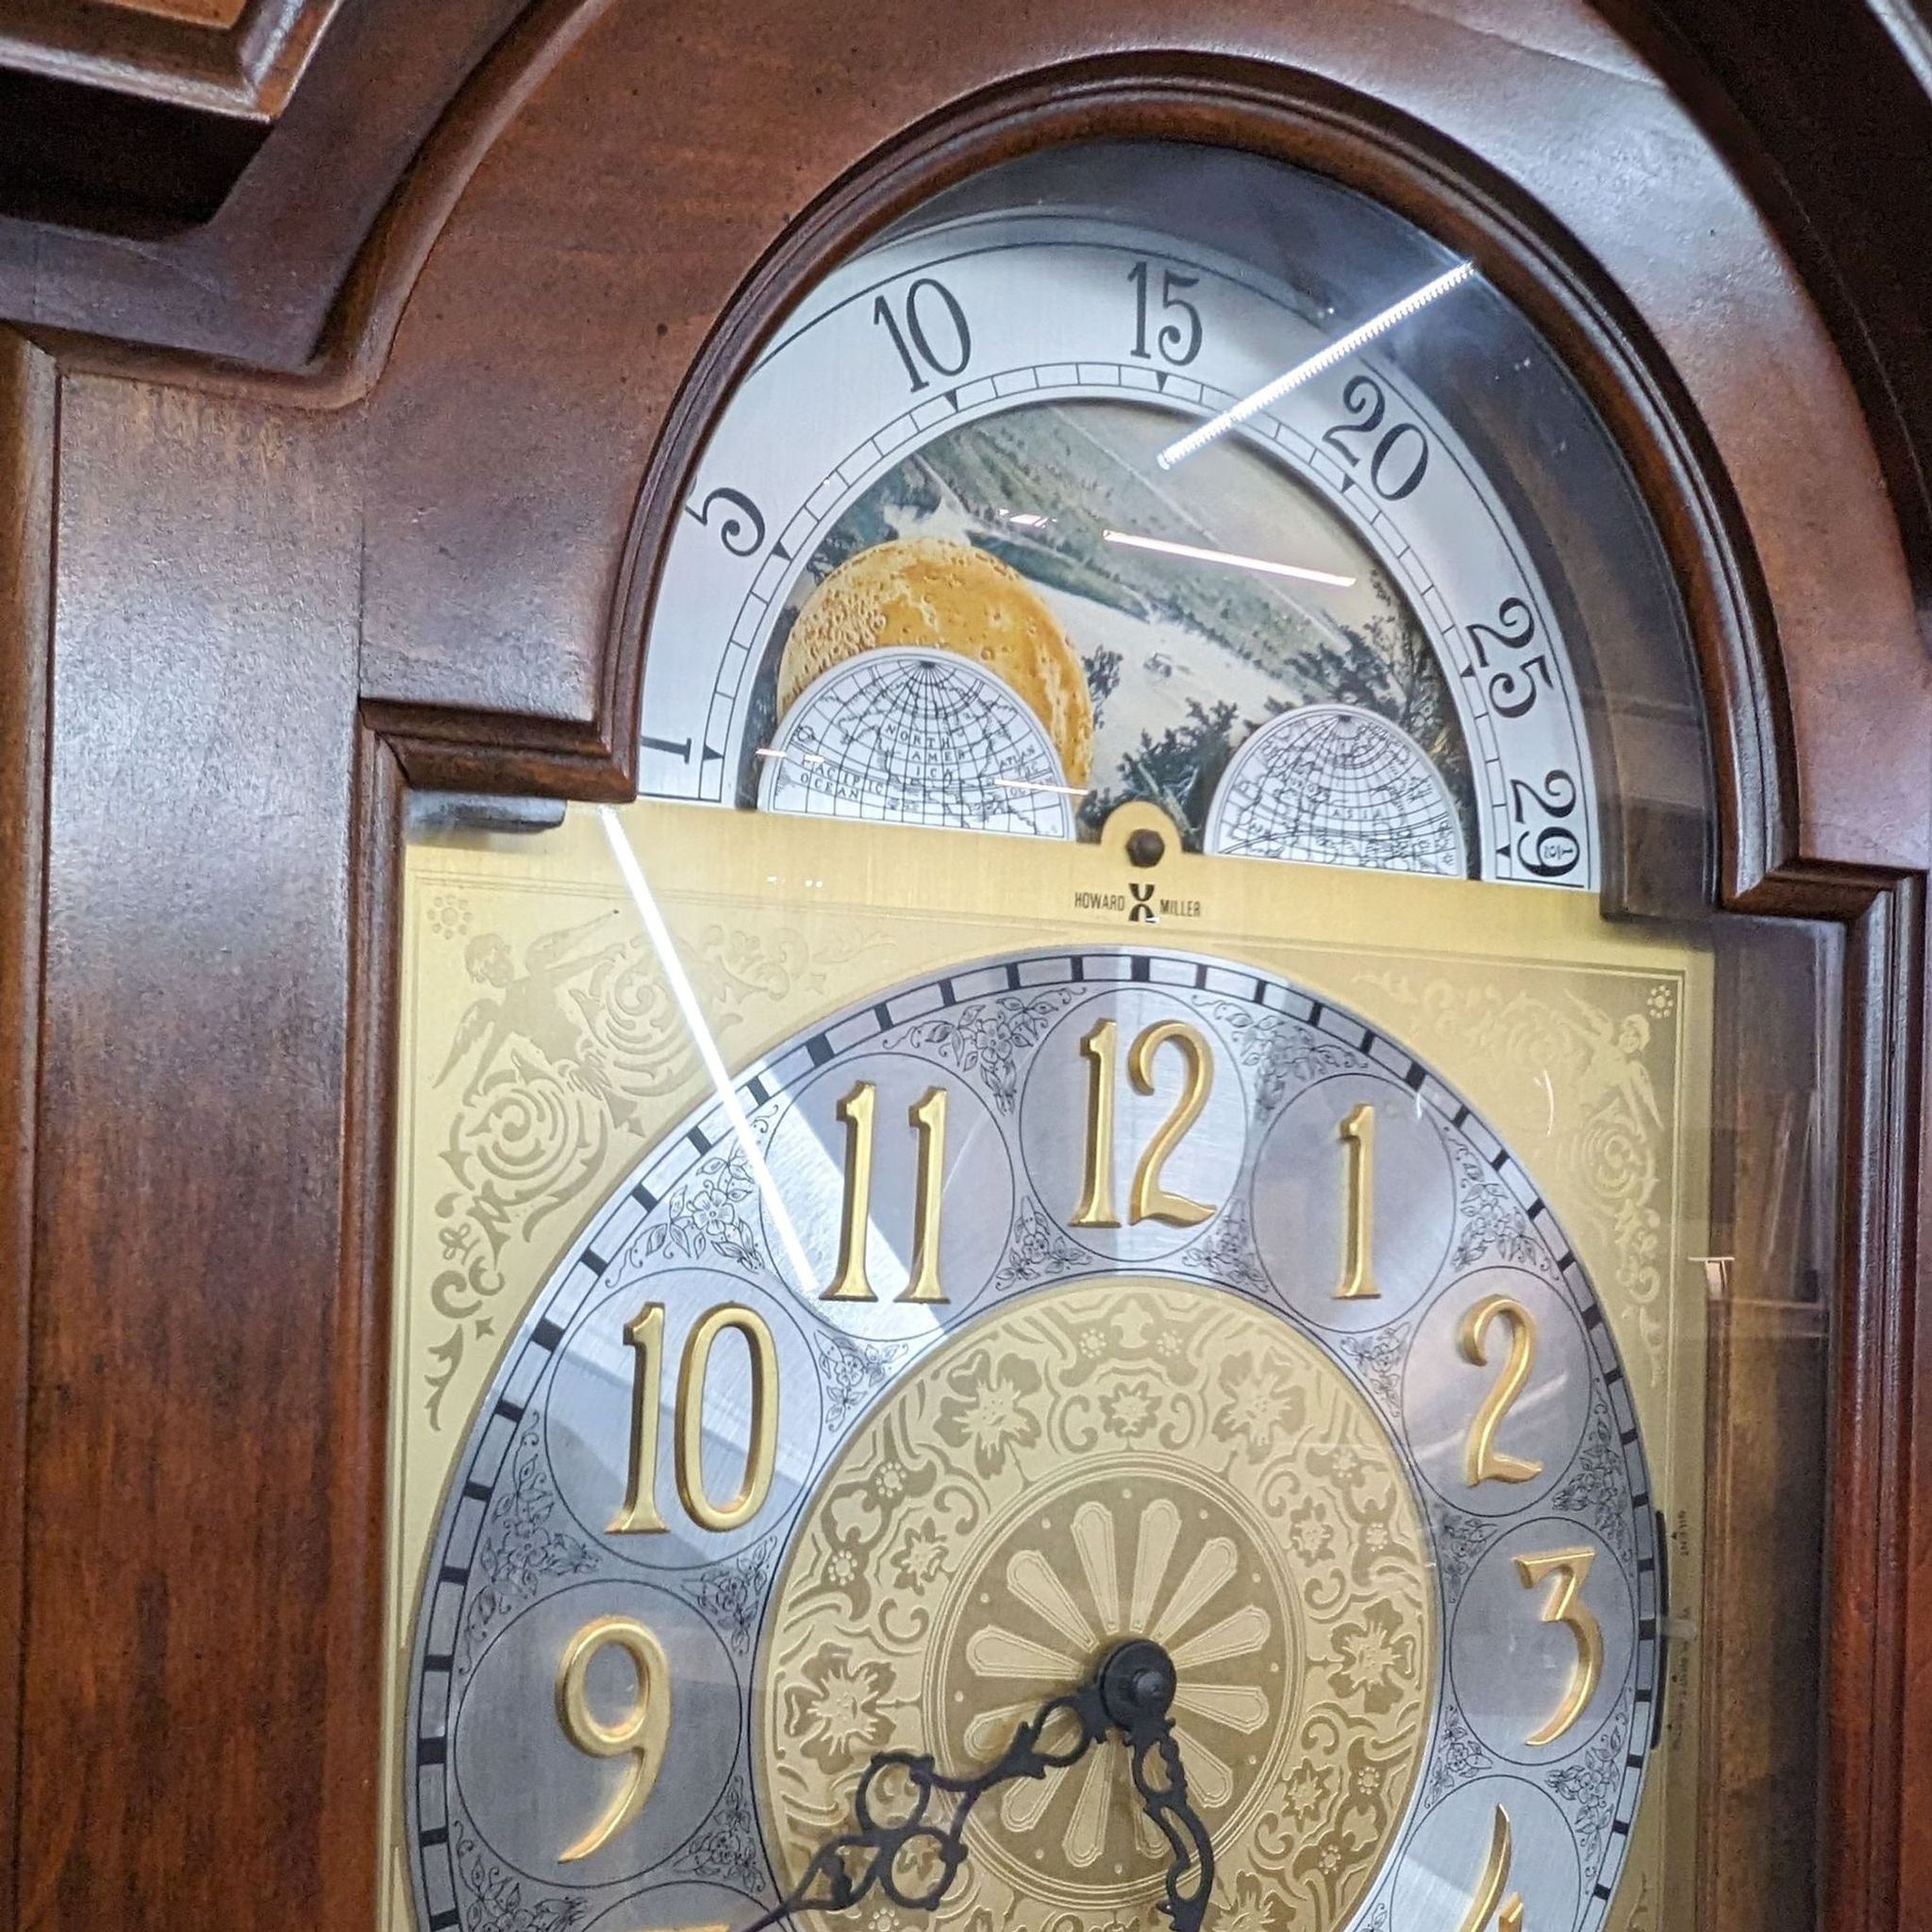 Close-up of Howard Miller Grandfather Clock showing detailed moon phase dial, decorative hands, and brass escutcheon on door.